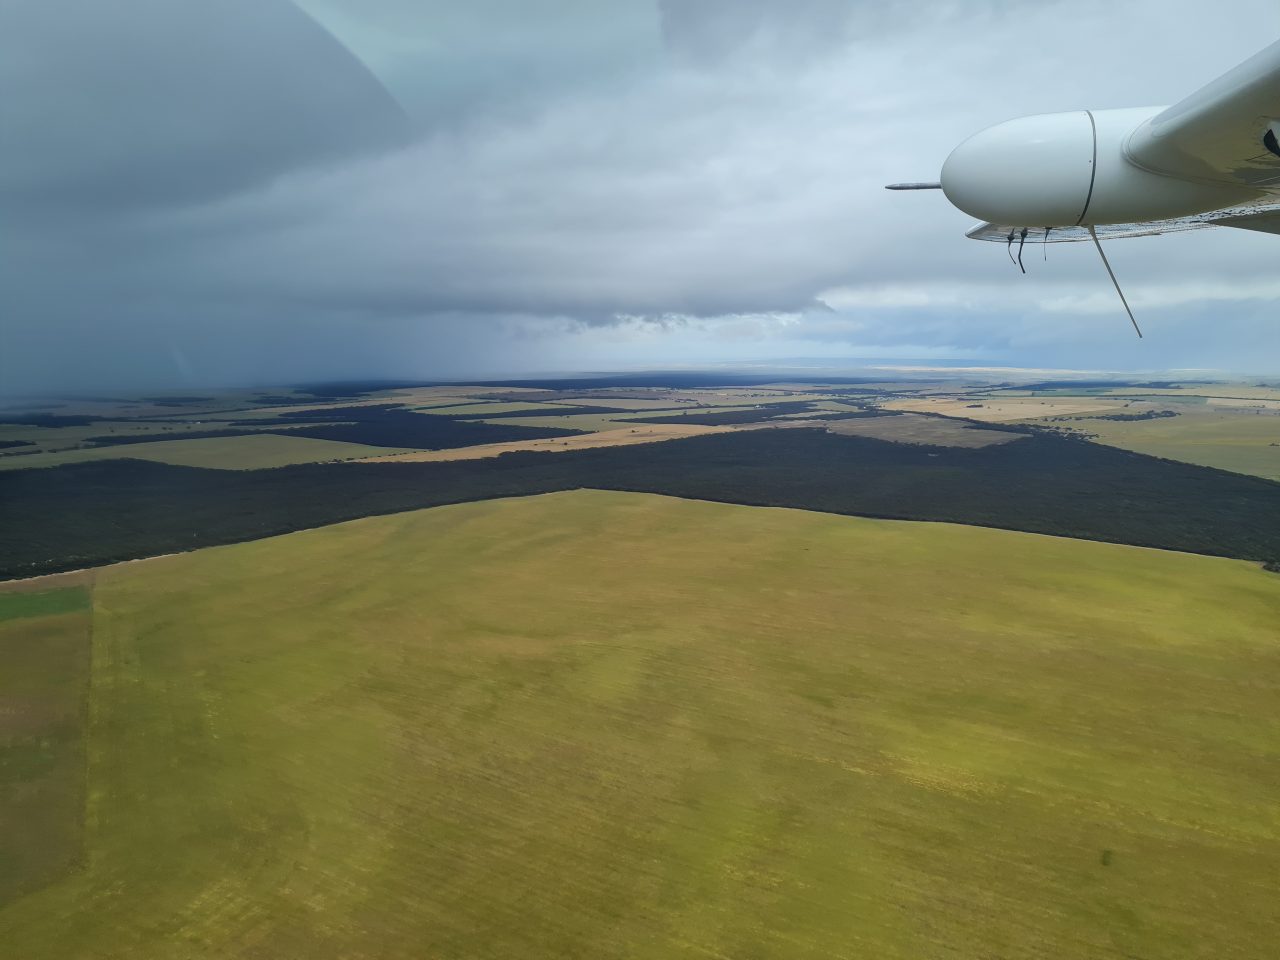 Aerial photo of clouds and rain of a storm front making their way across the land which is a patchwork of cleared and forested  areas. The plane wing is visible in the side of the picture.